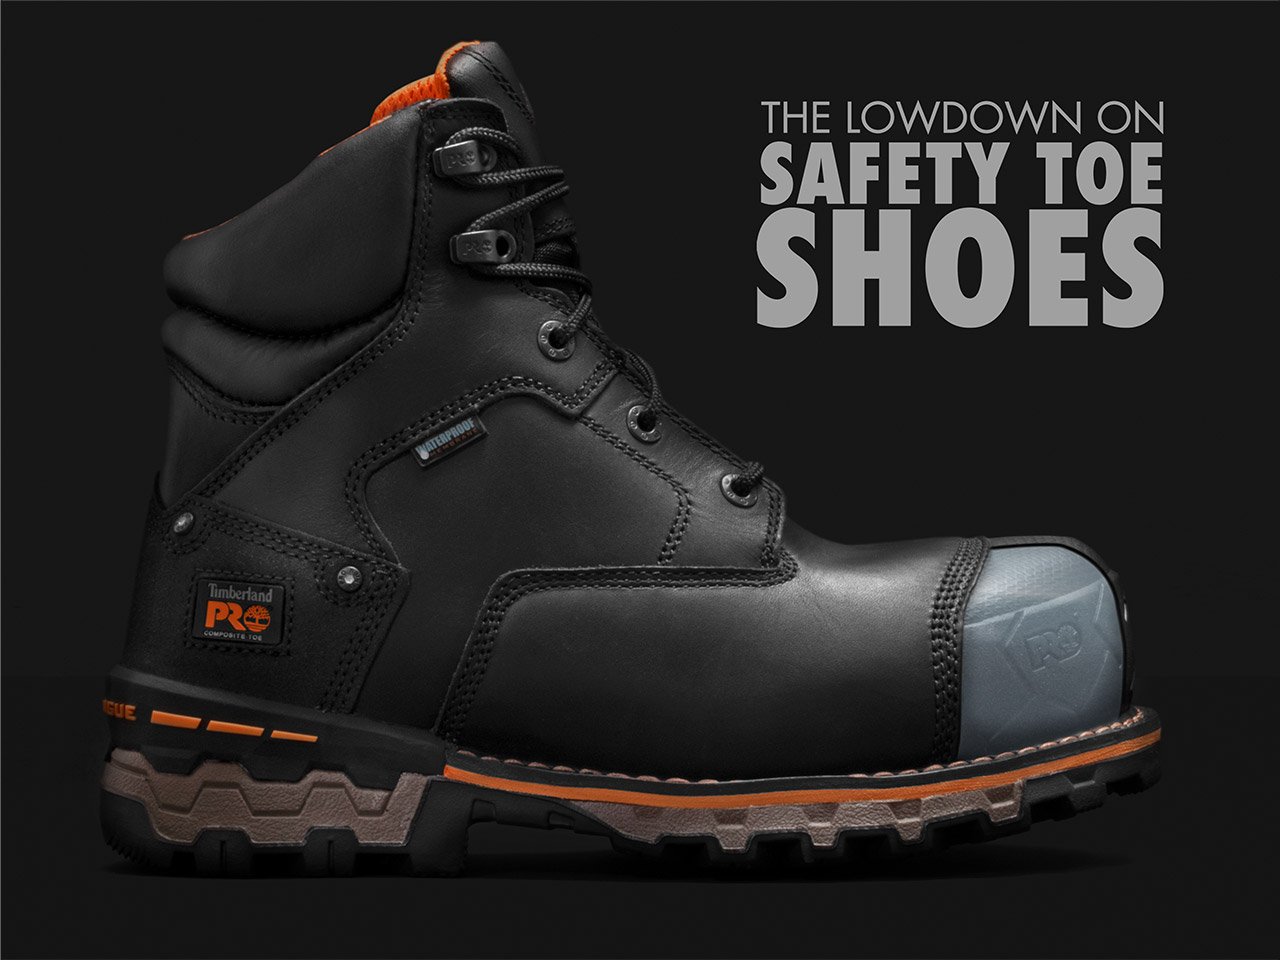 Black Lightweight Safety Trainers Shoes Women Work Boots Steel Toe Cap Composite 